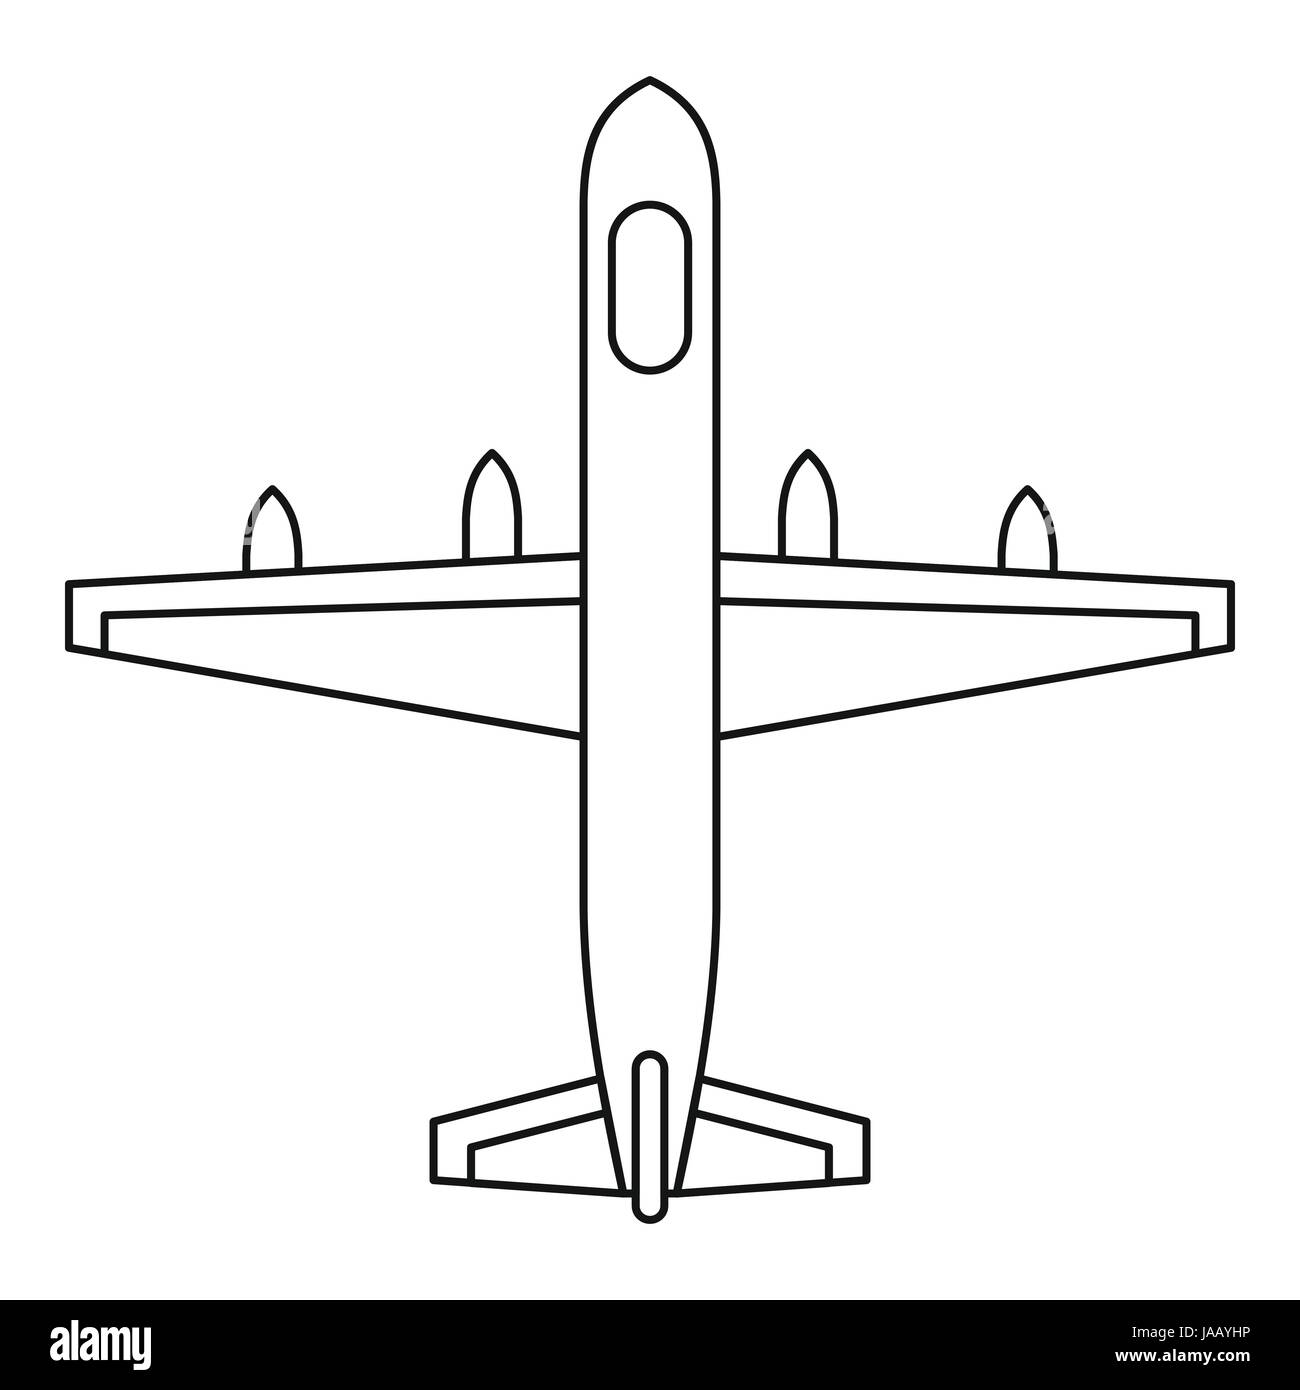 Plane icon, outline style Stock Vector